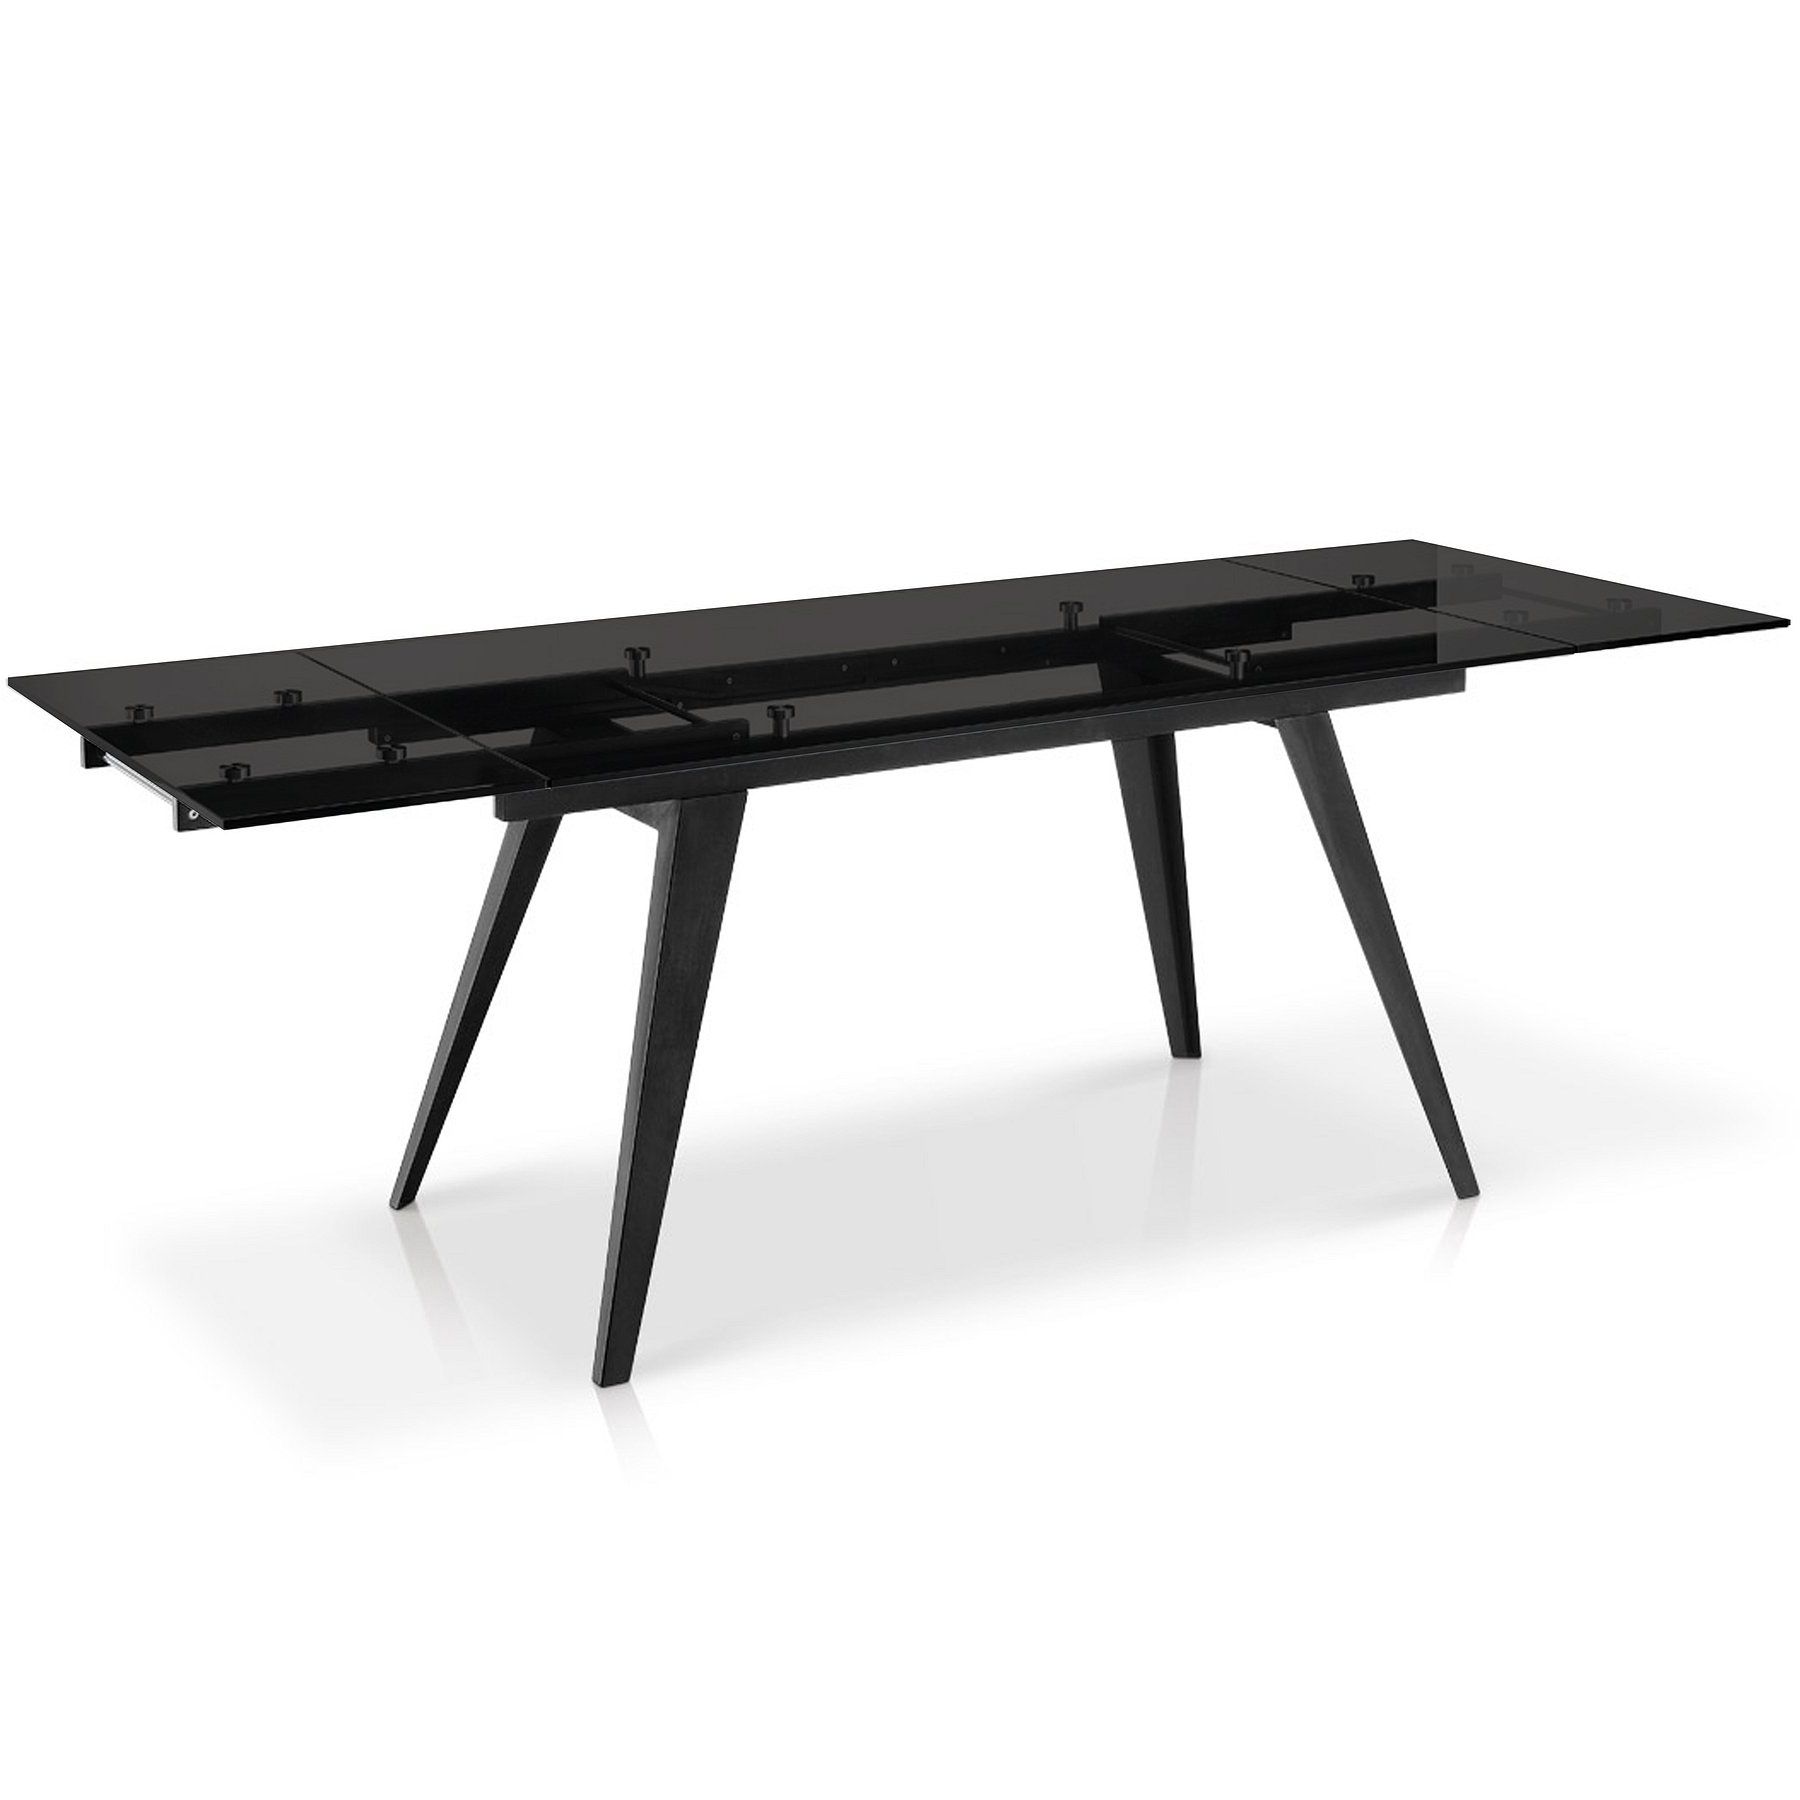 Sef3051 Dining Table For Widely Used Modern Glass Top Extension Dining Tables In Matte Black (View 24 of 30)